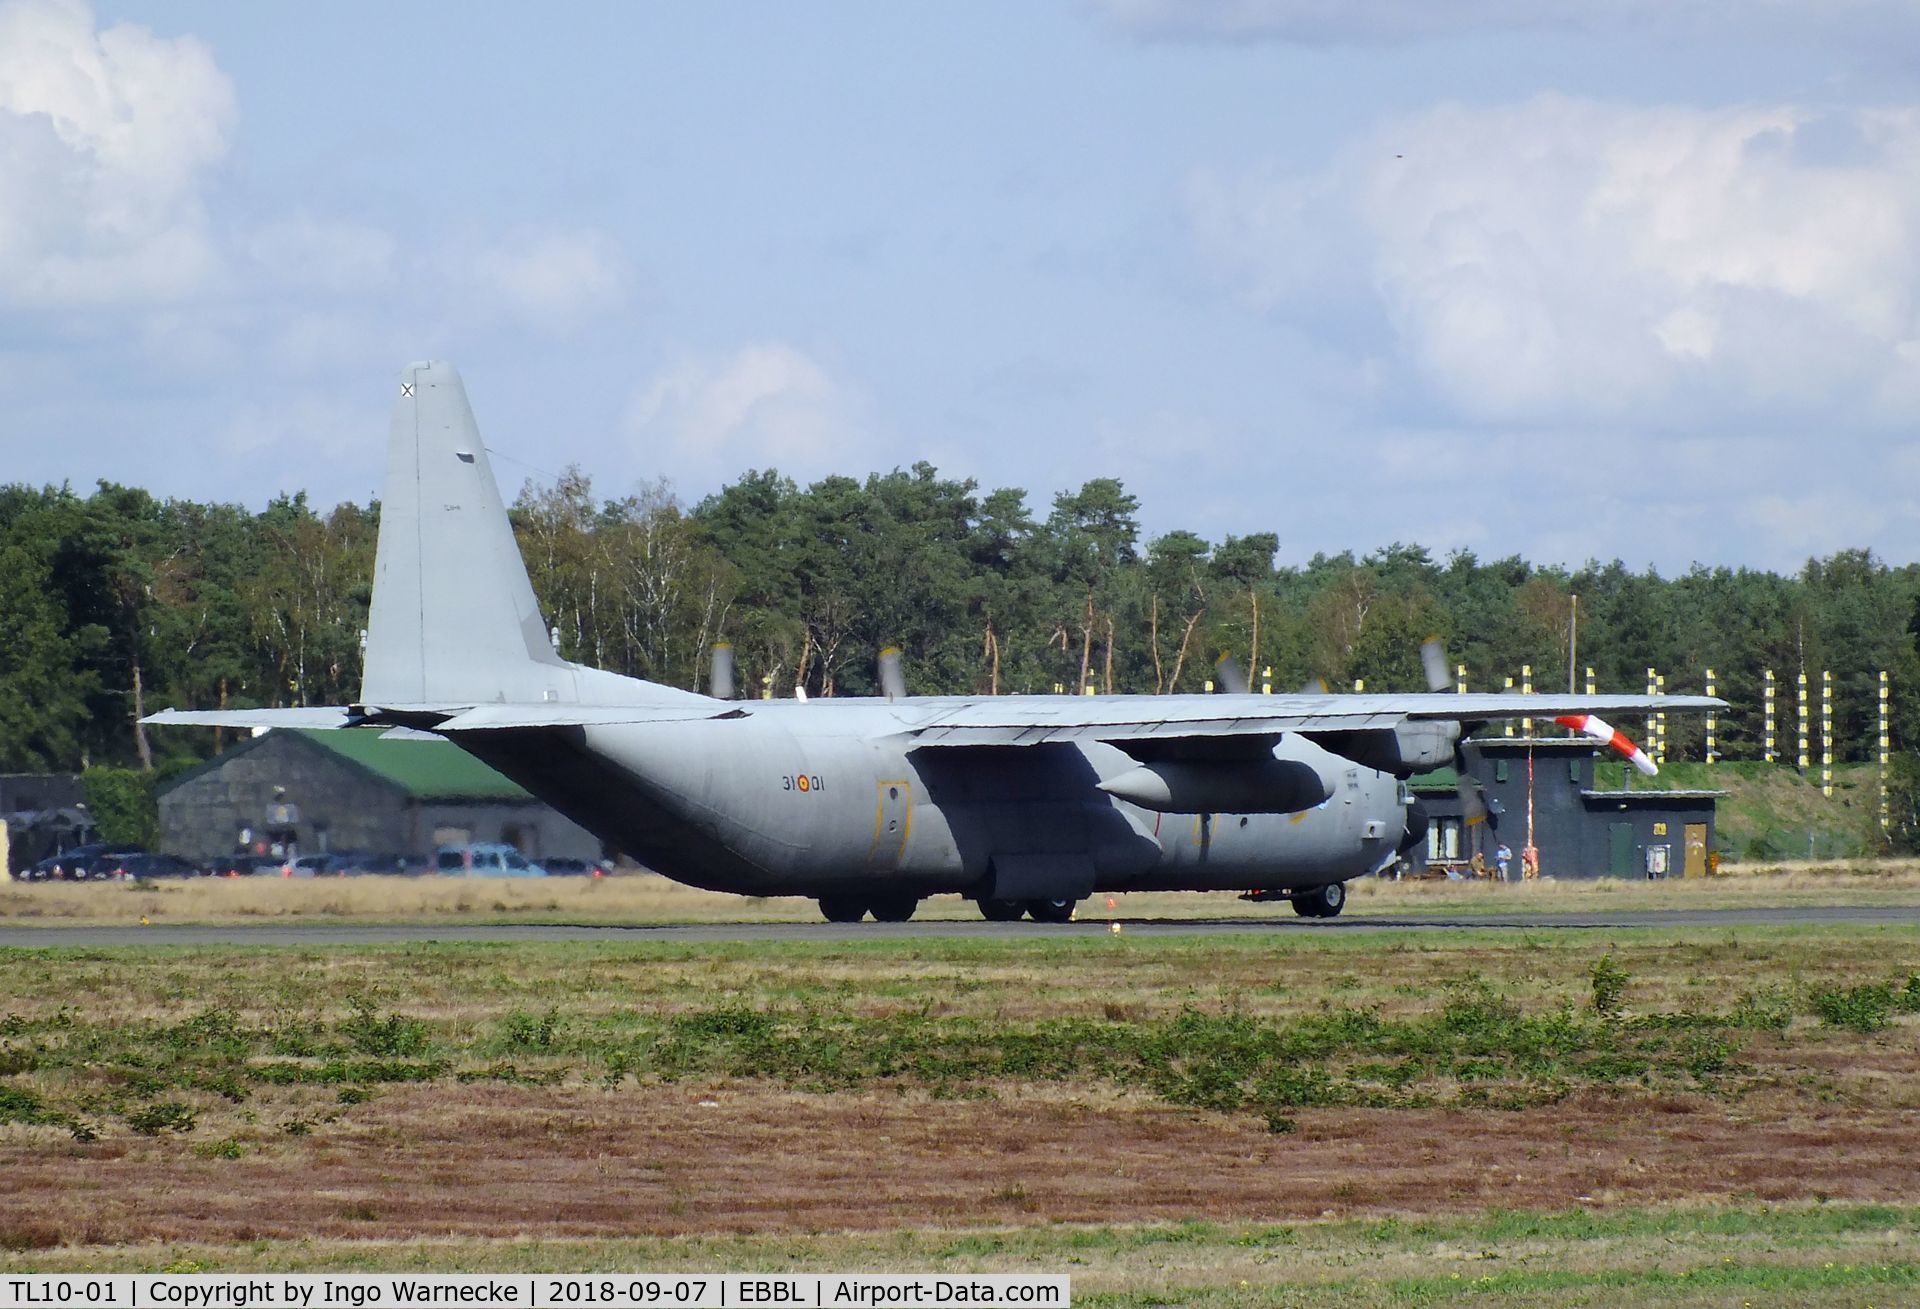 TL10-01, 1988 Lockheed C-130H-30 Hercules C/N 382-5003, Lockheed C-130H-30 Hercules of the Ejercito del Aire (Spanish AF) at the 2018 BAFD spotters day, Kleine Brogel airbase